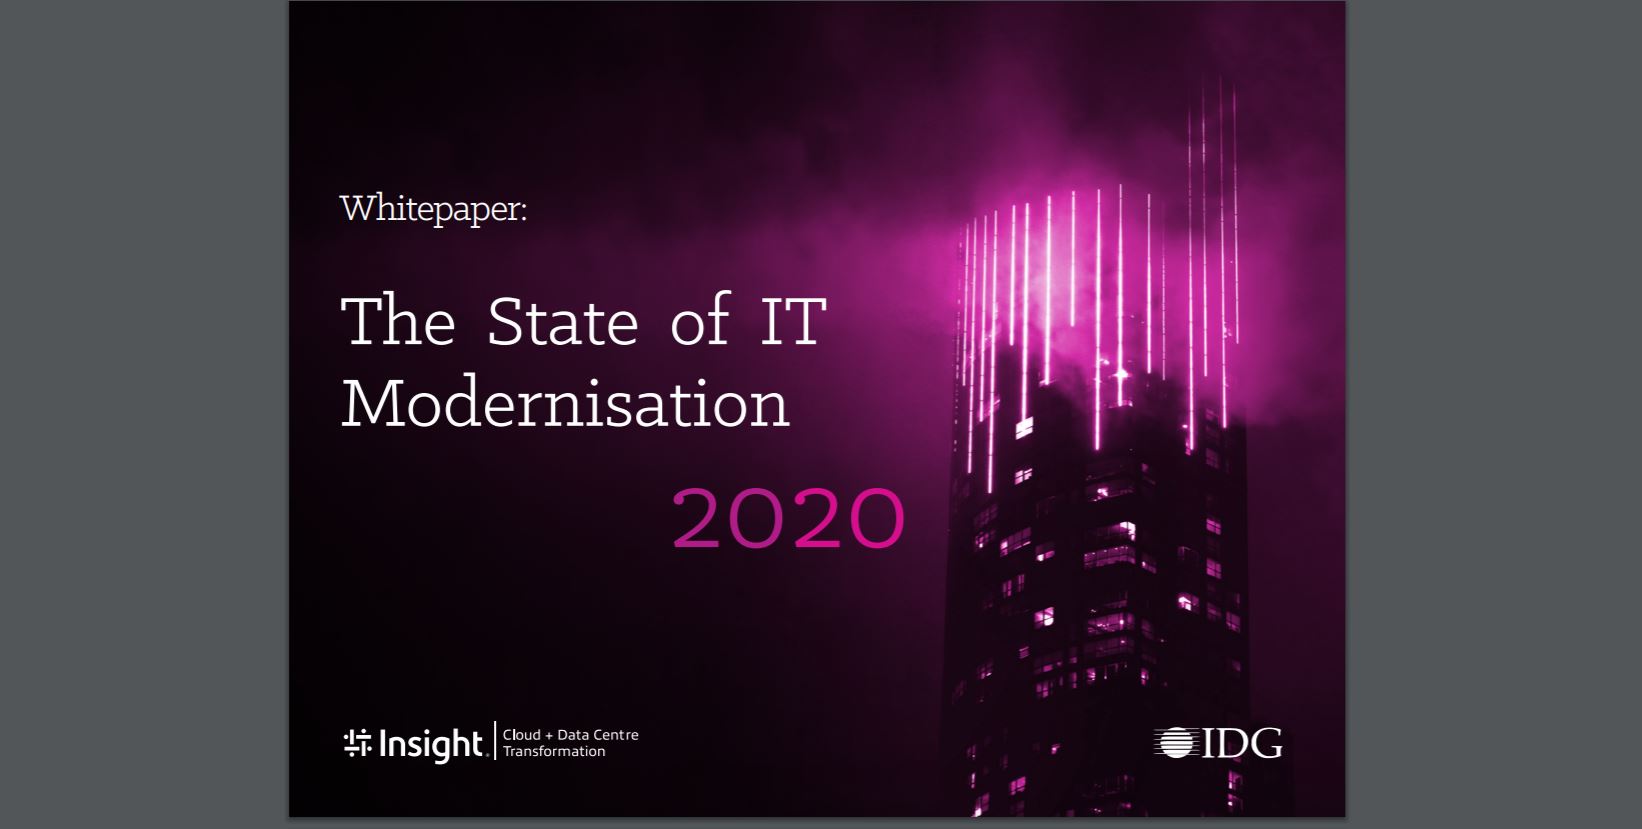 Cover of the State of IT Modernization 2020 ebook